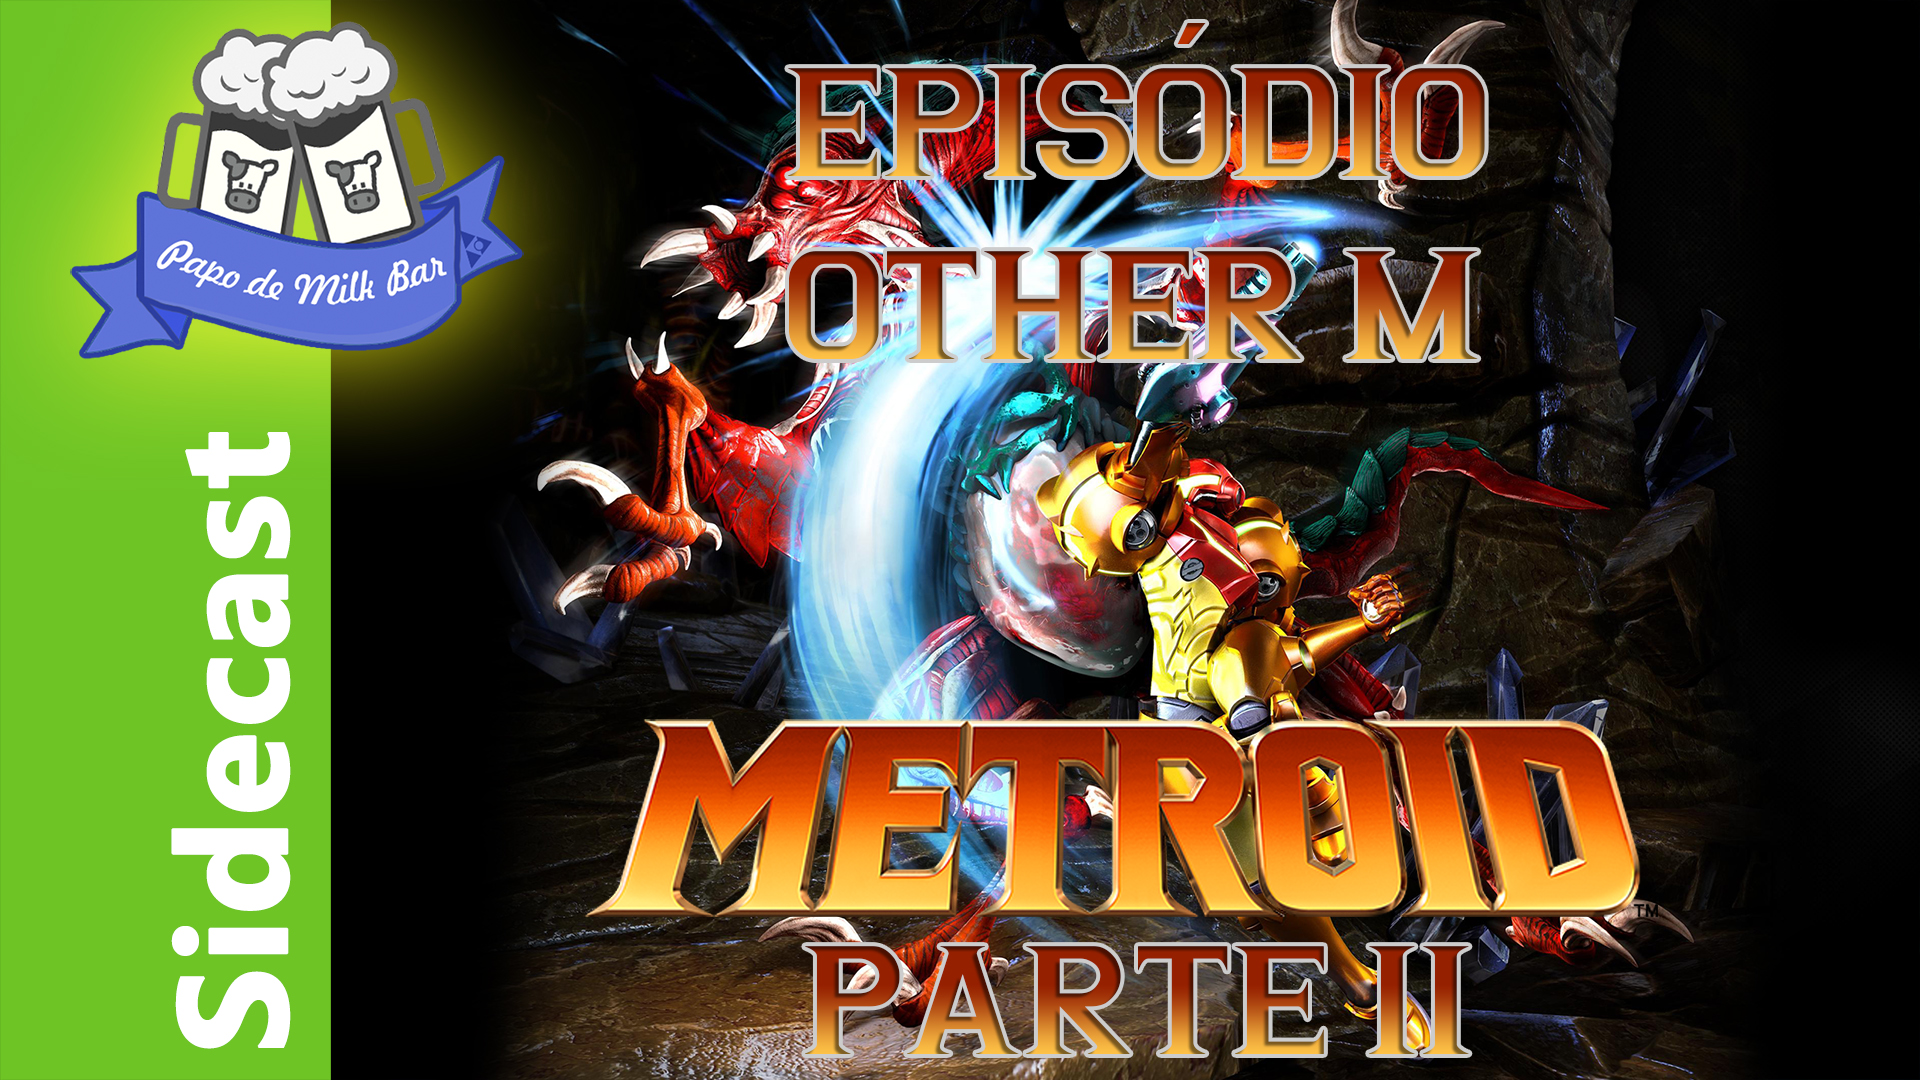 Sidecast Other M – Metroid (parte 2)